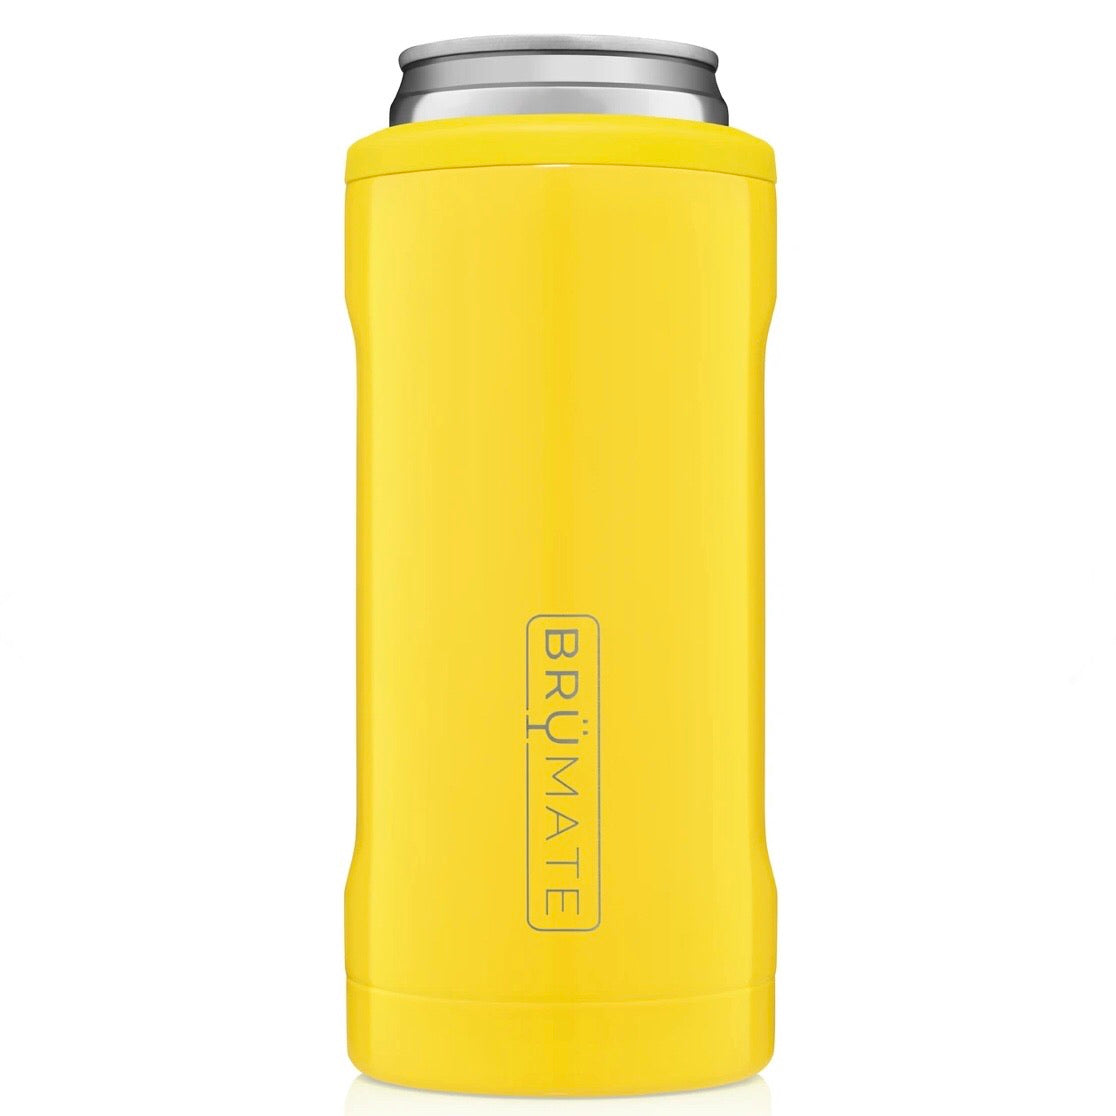 slim cans leak-proof drinkware hot to cold insulated drinkware tumbler like yeti brumate spillproof neon yellow